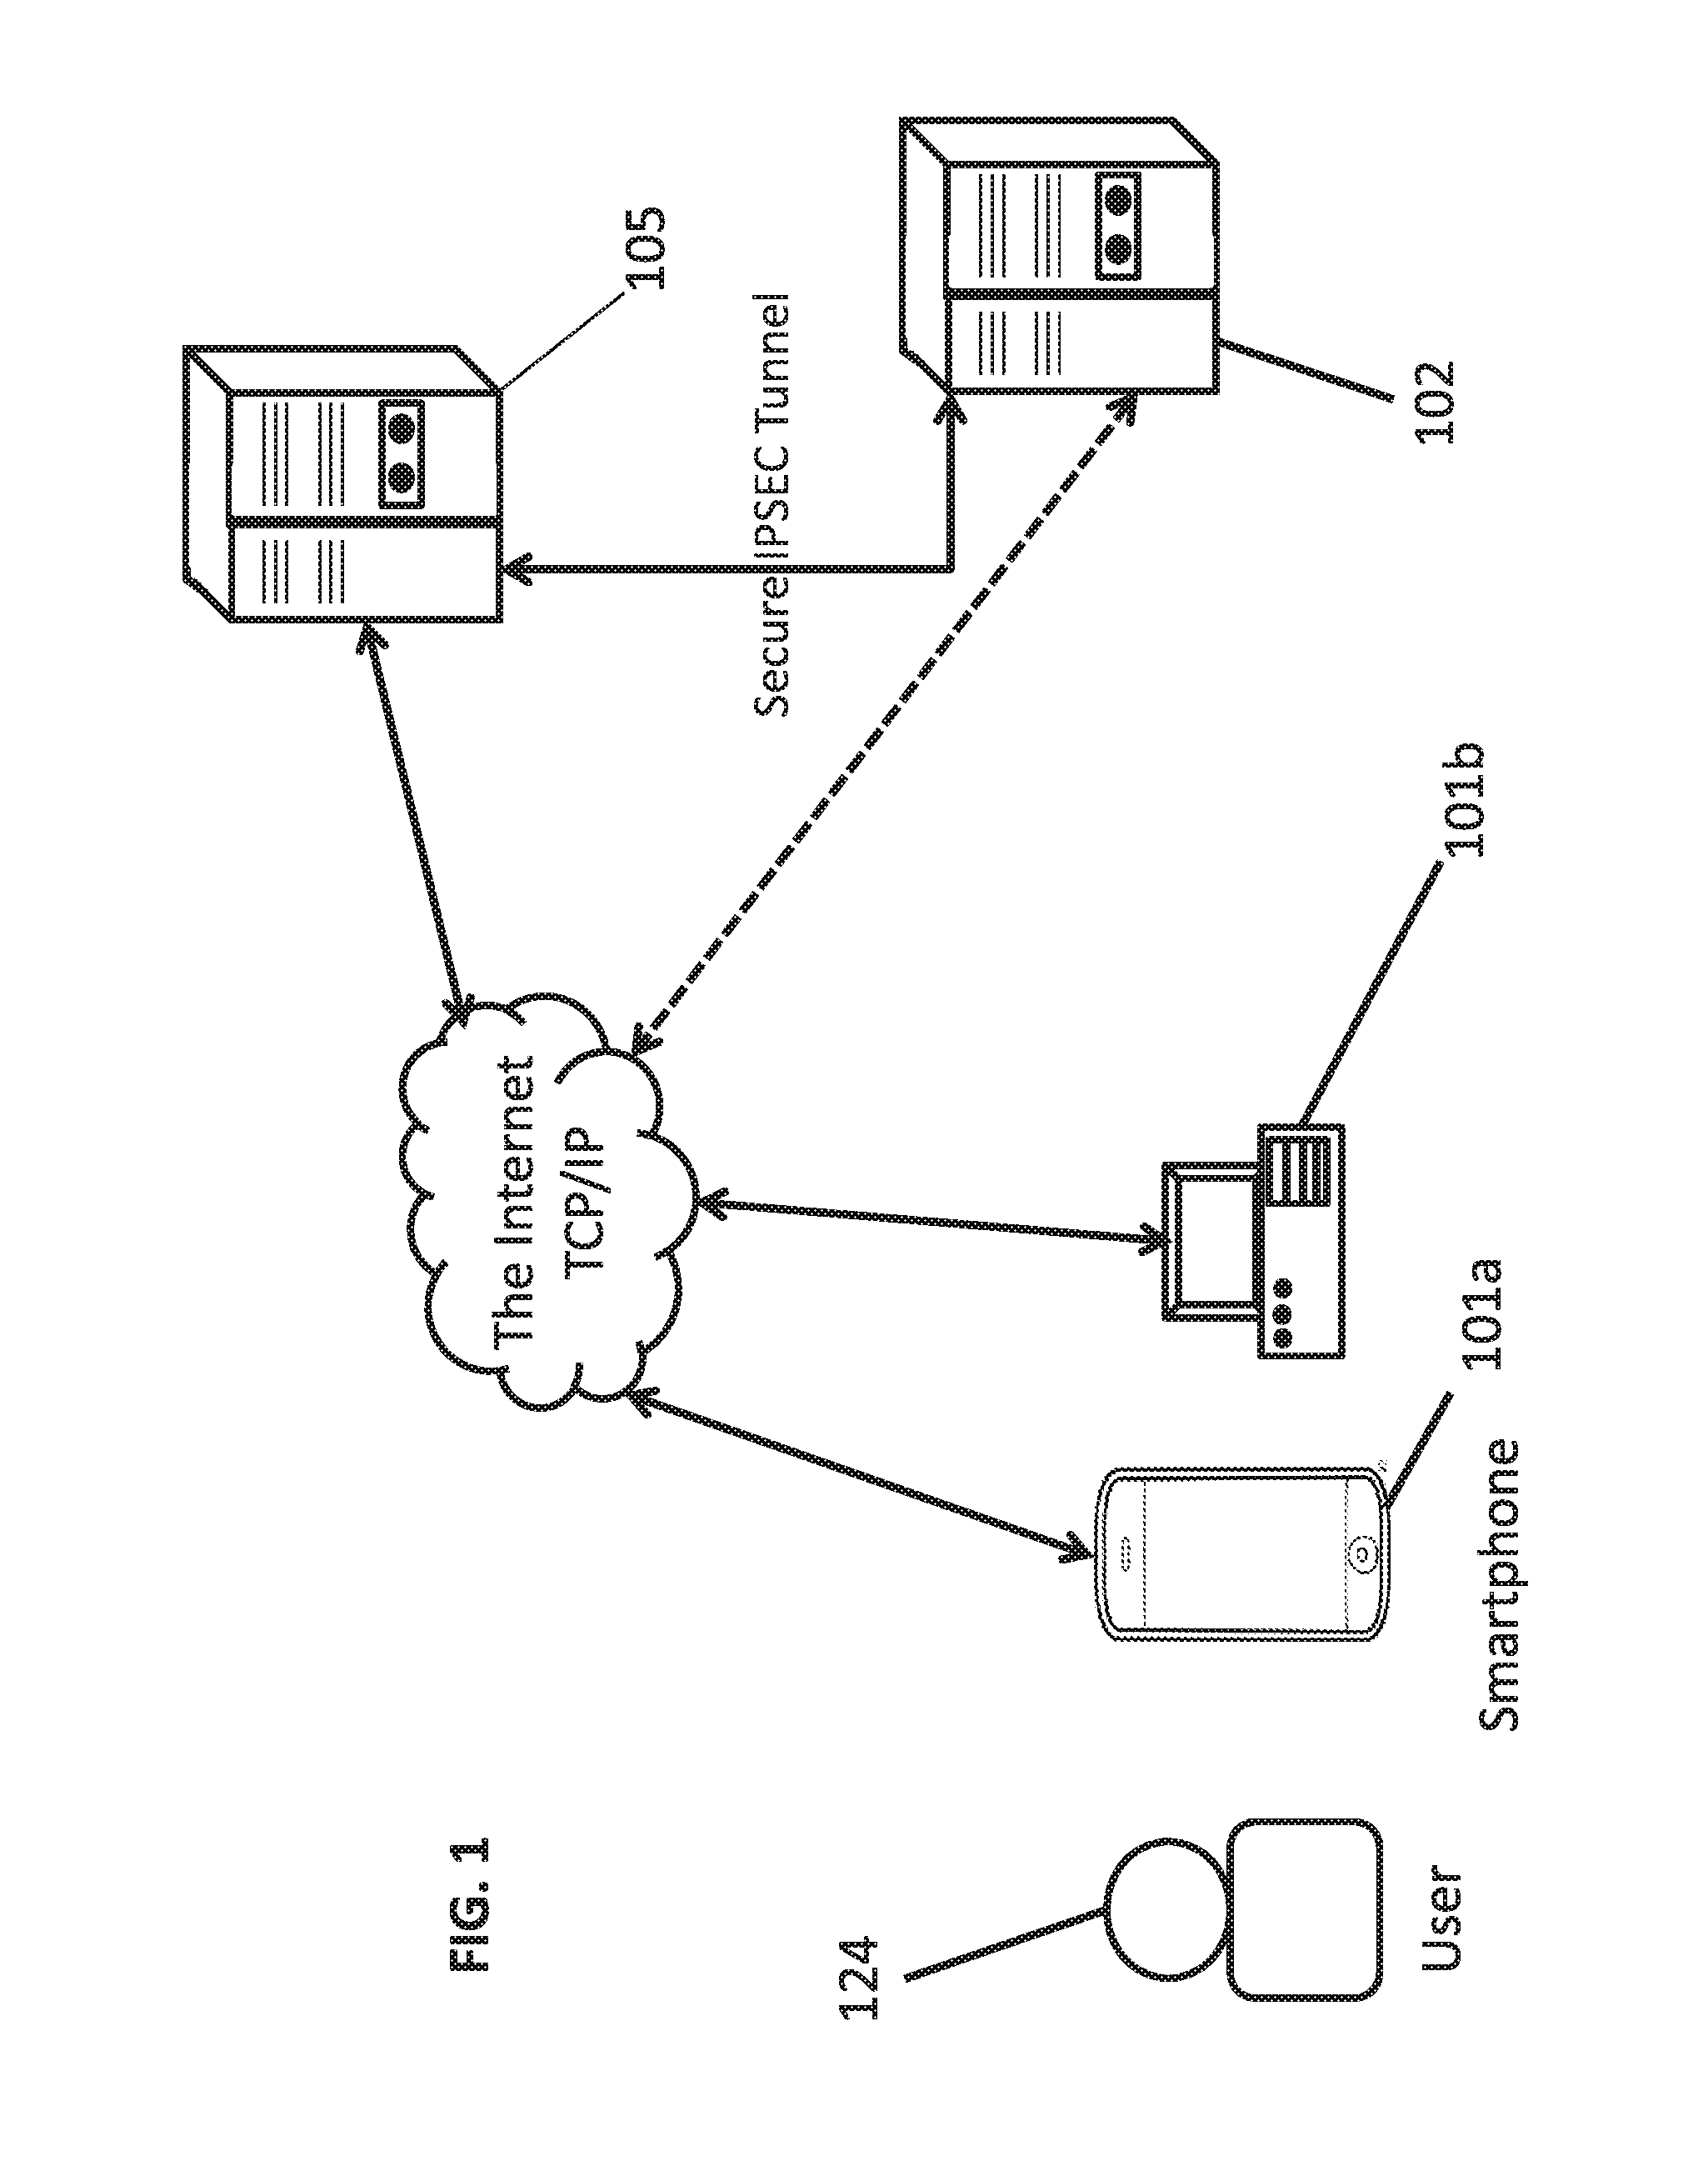 Systems and methods for performing fingerprint based user authentication using imagery captured using mobile devices